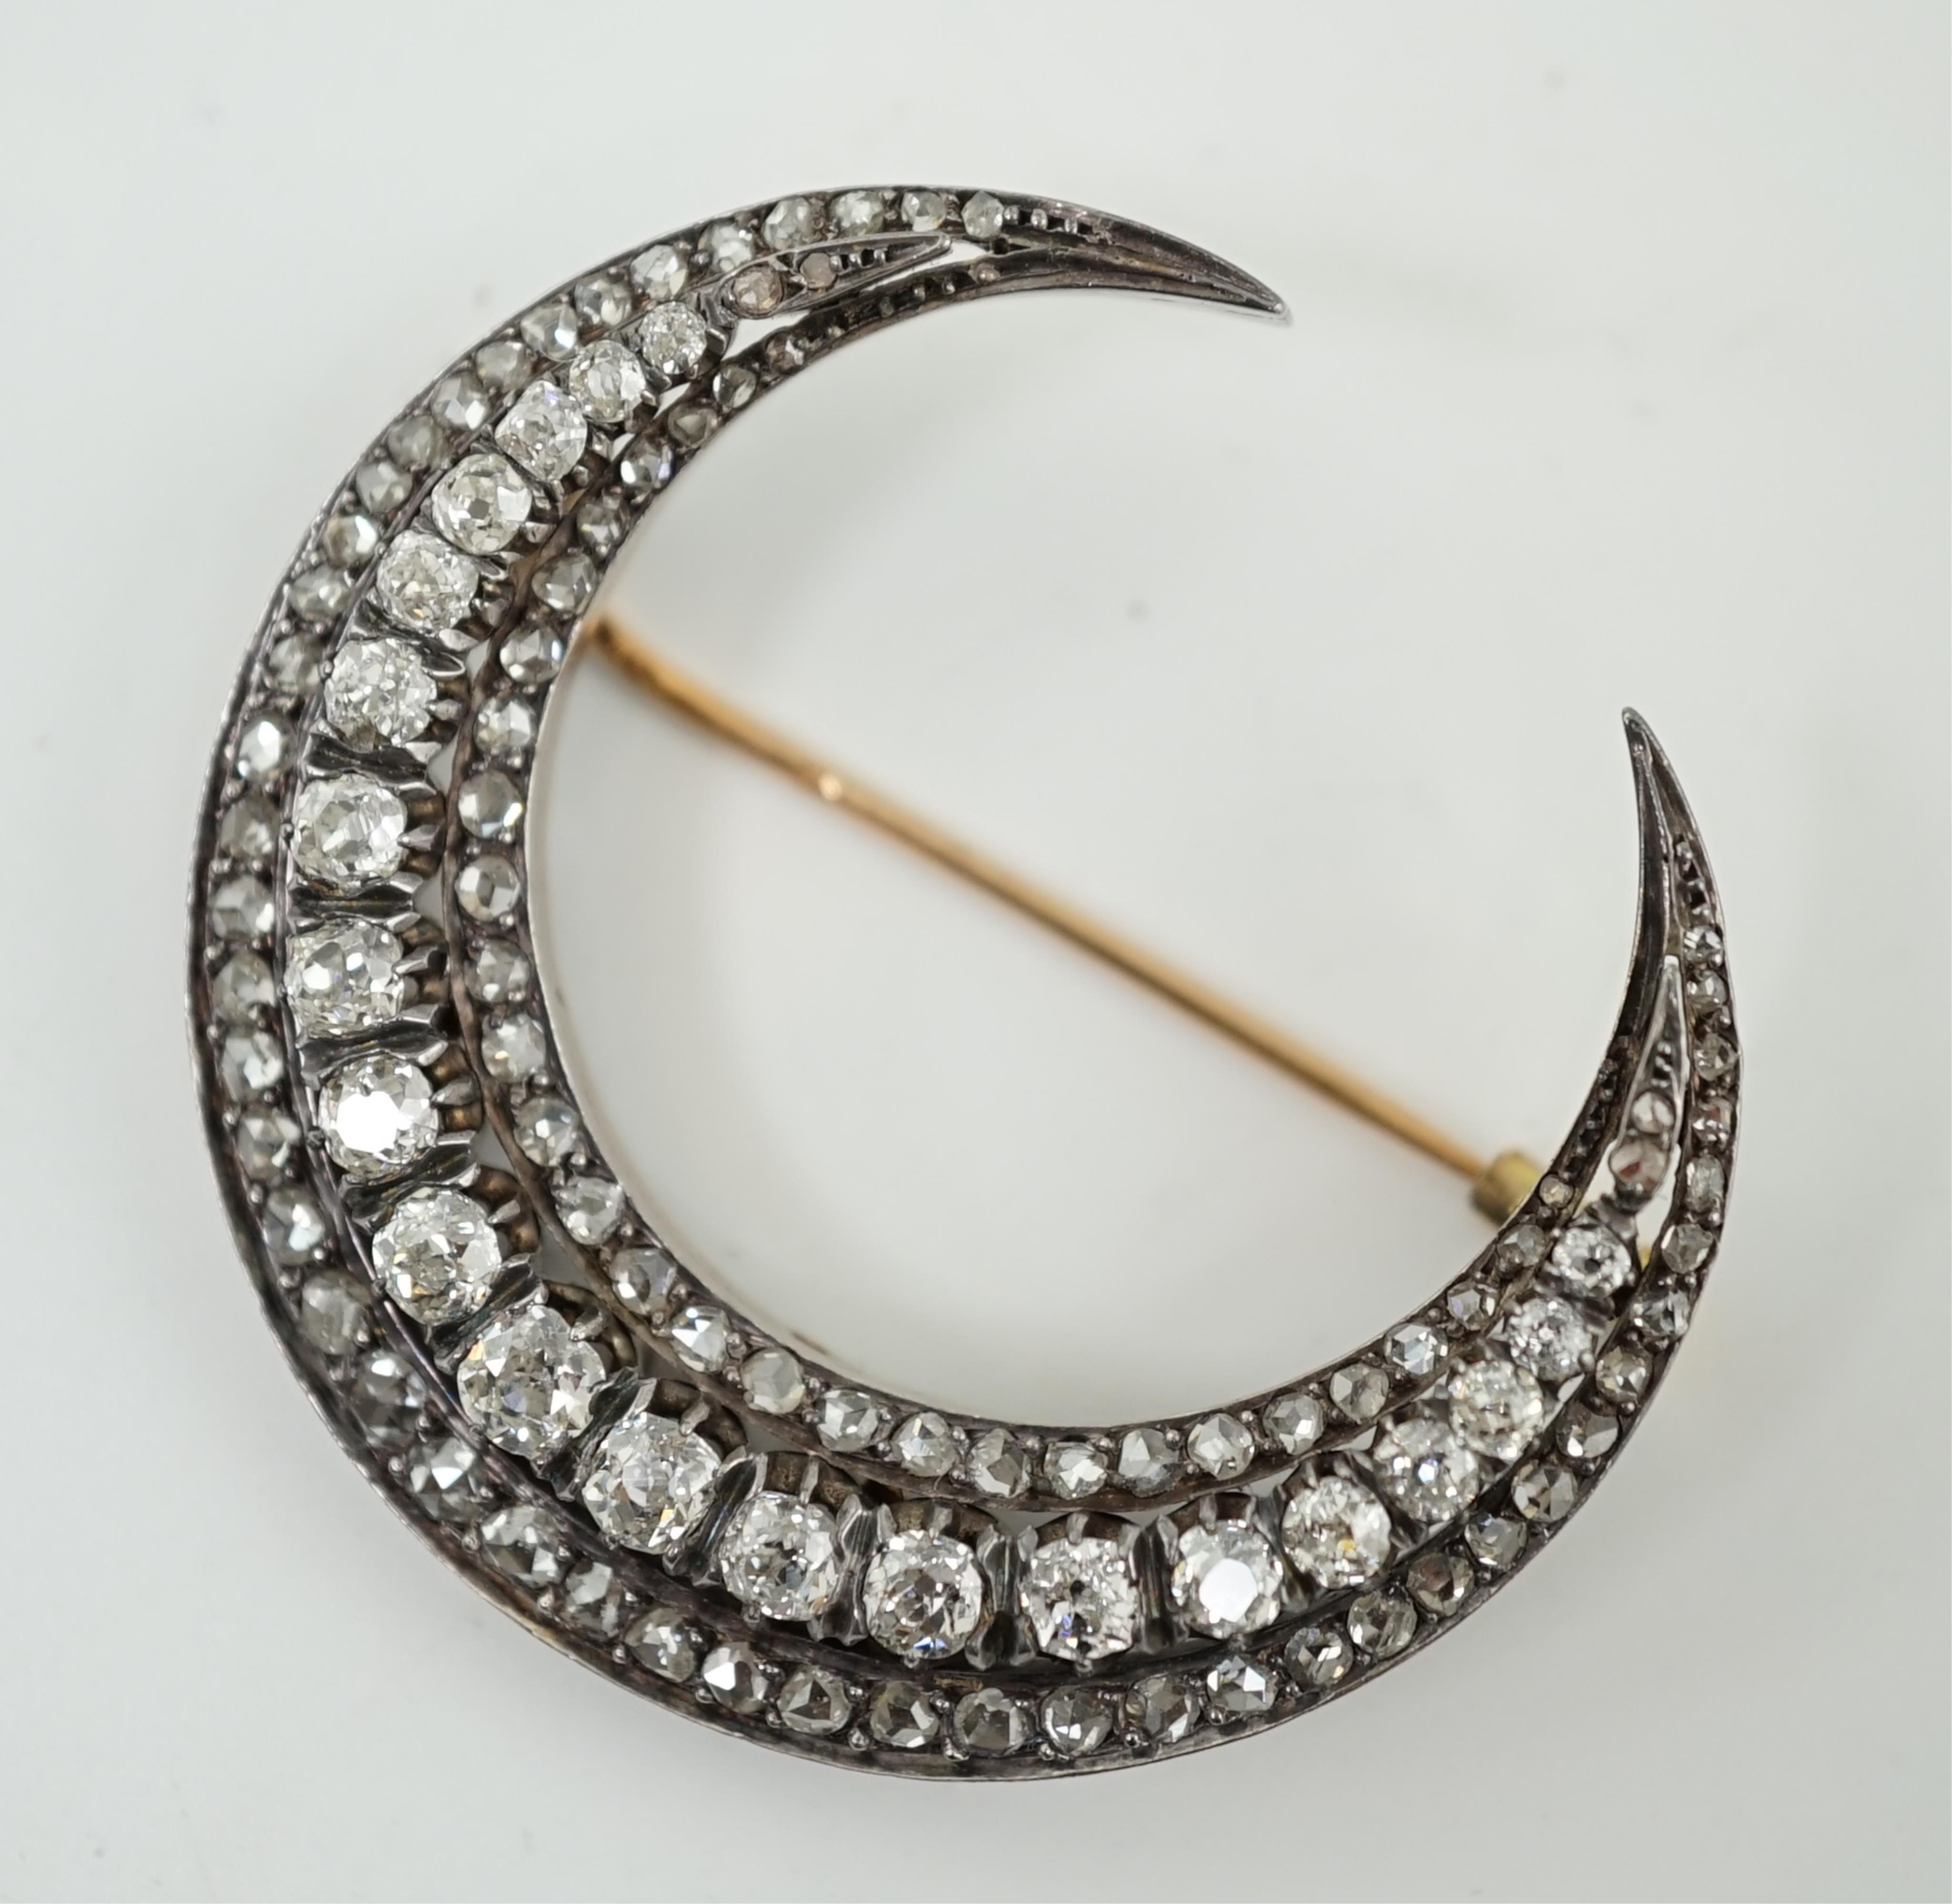 A late 19th/early 20th century French 18ct gold and silver, old mine and rose cut diamond set three row crescent brooch